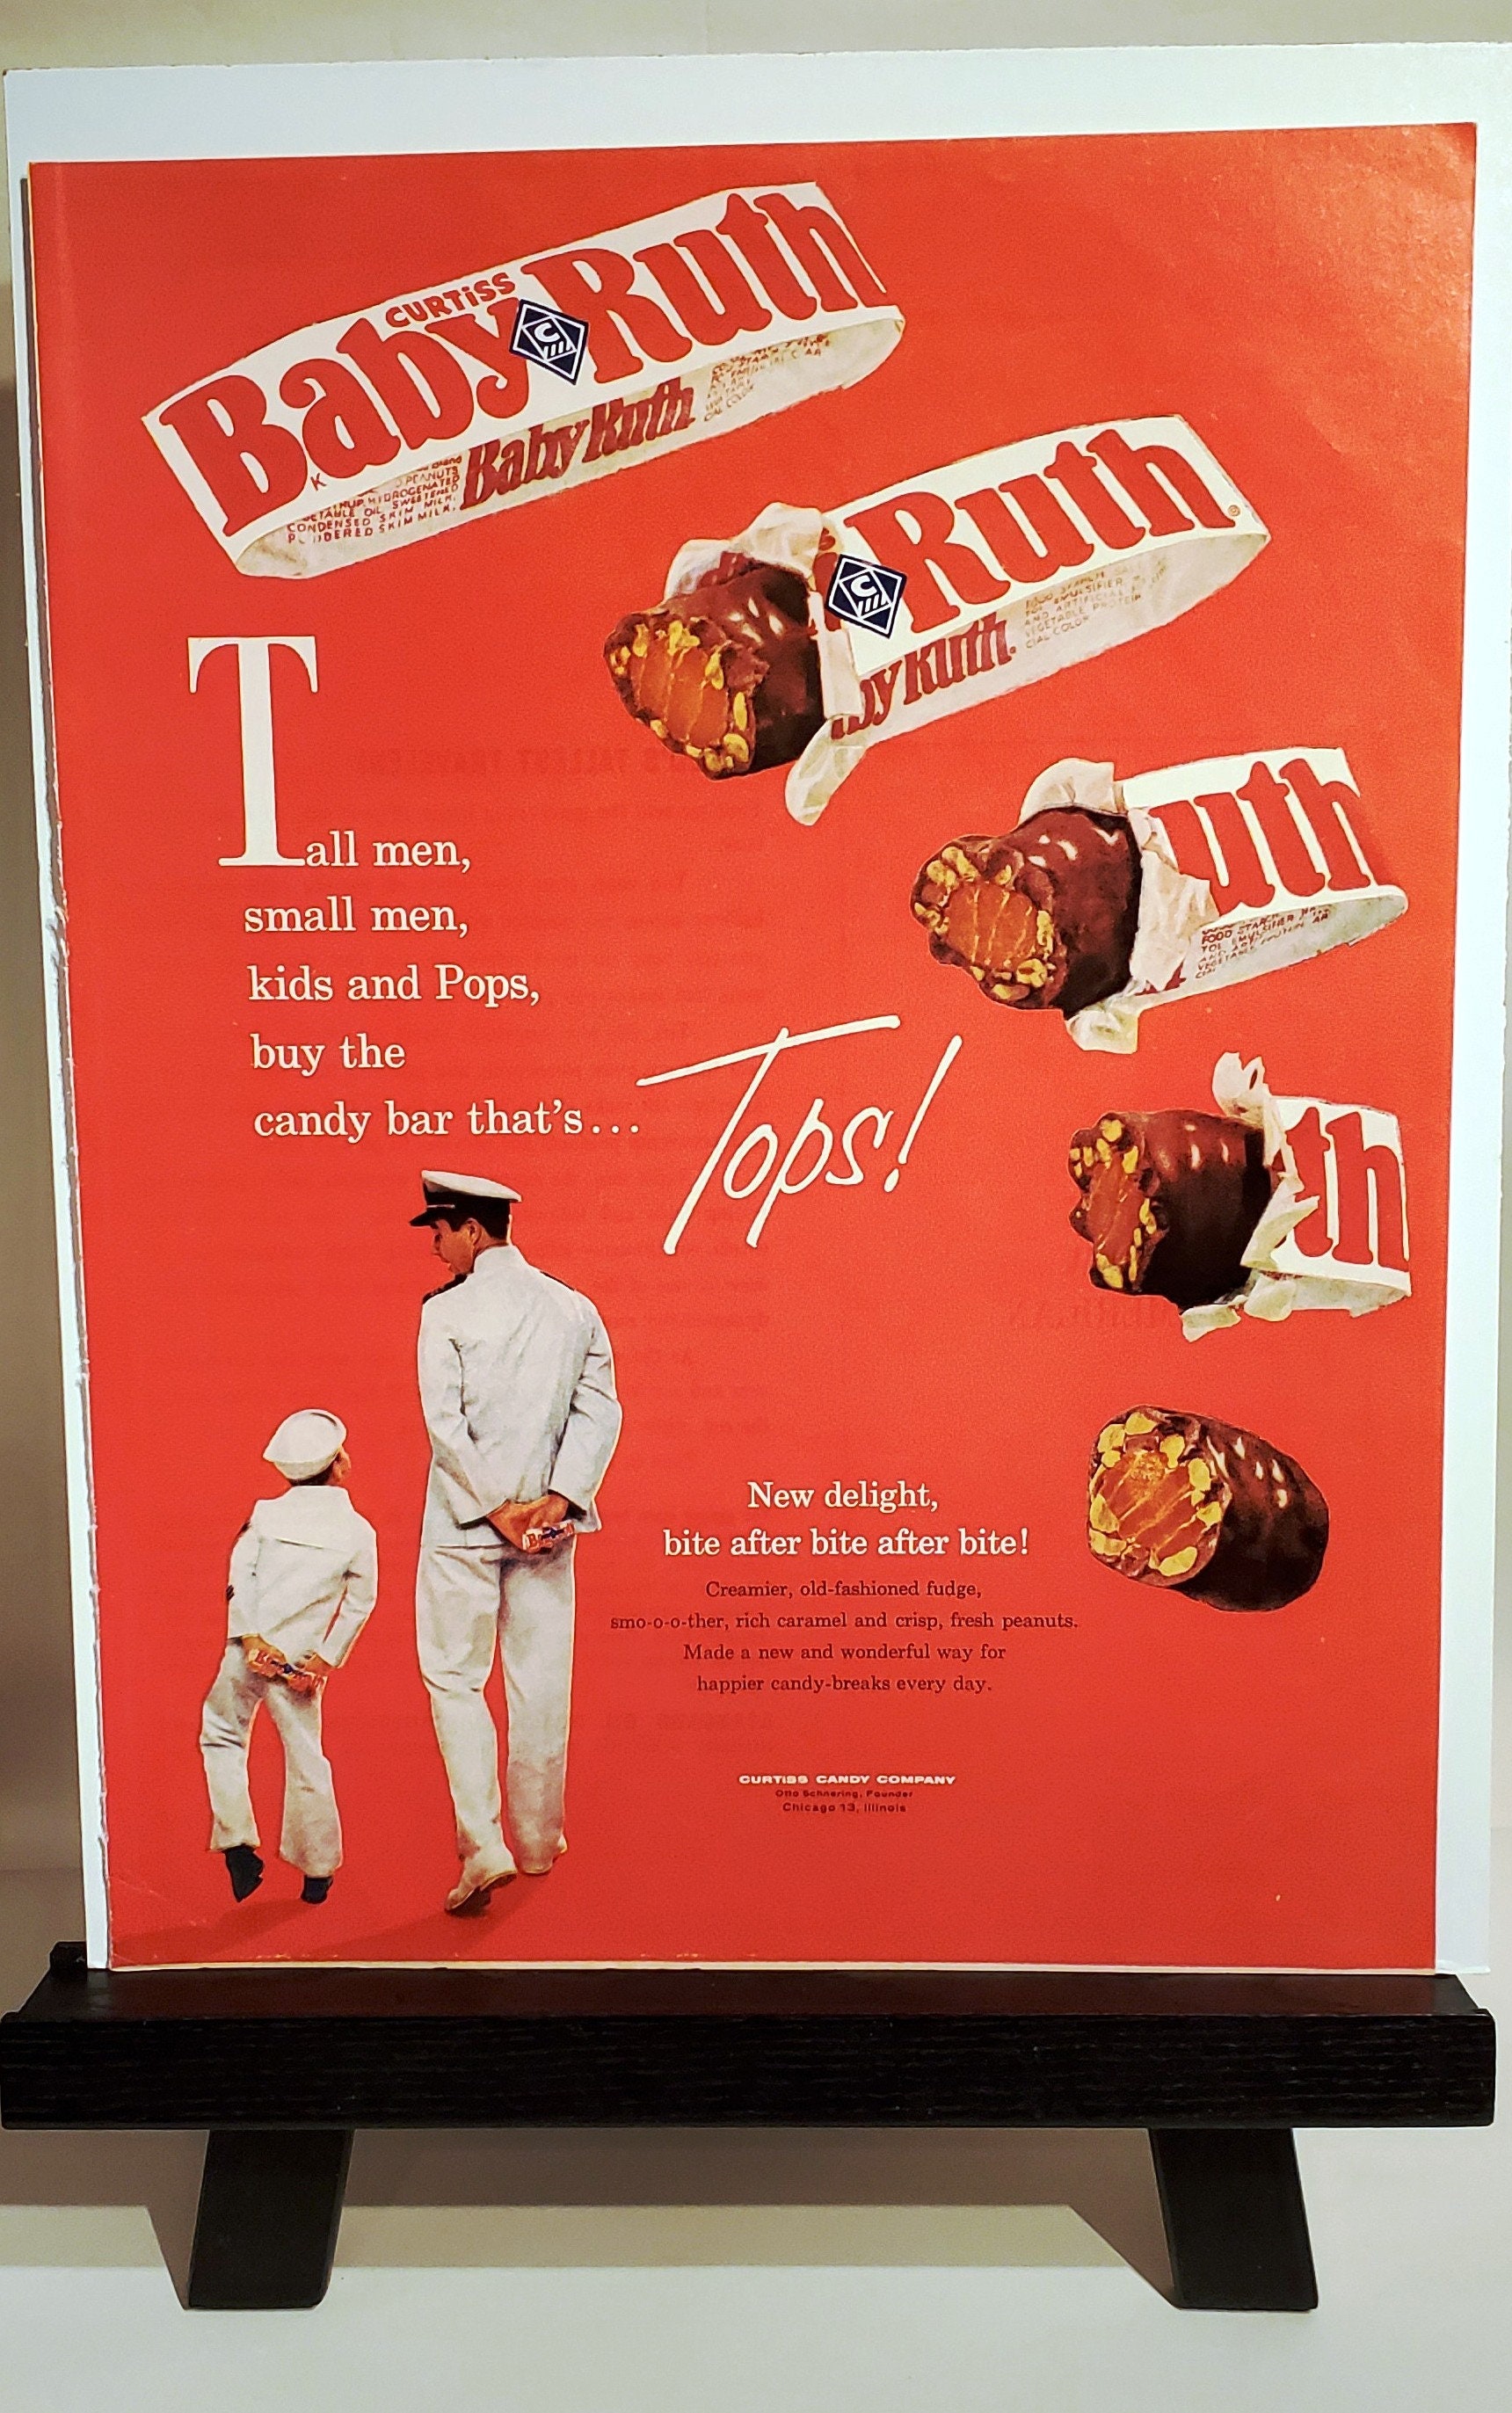 1960 Vintage Baby Ruth Ad, Curtiss Candy Company, Candy Bar, Old